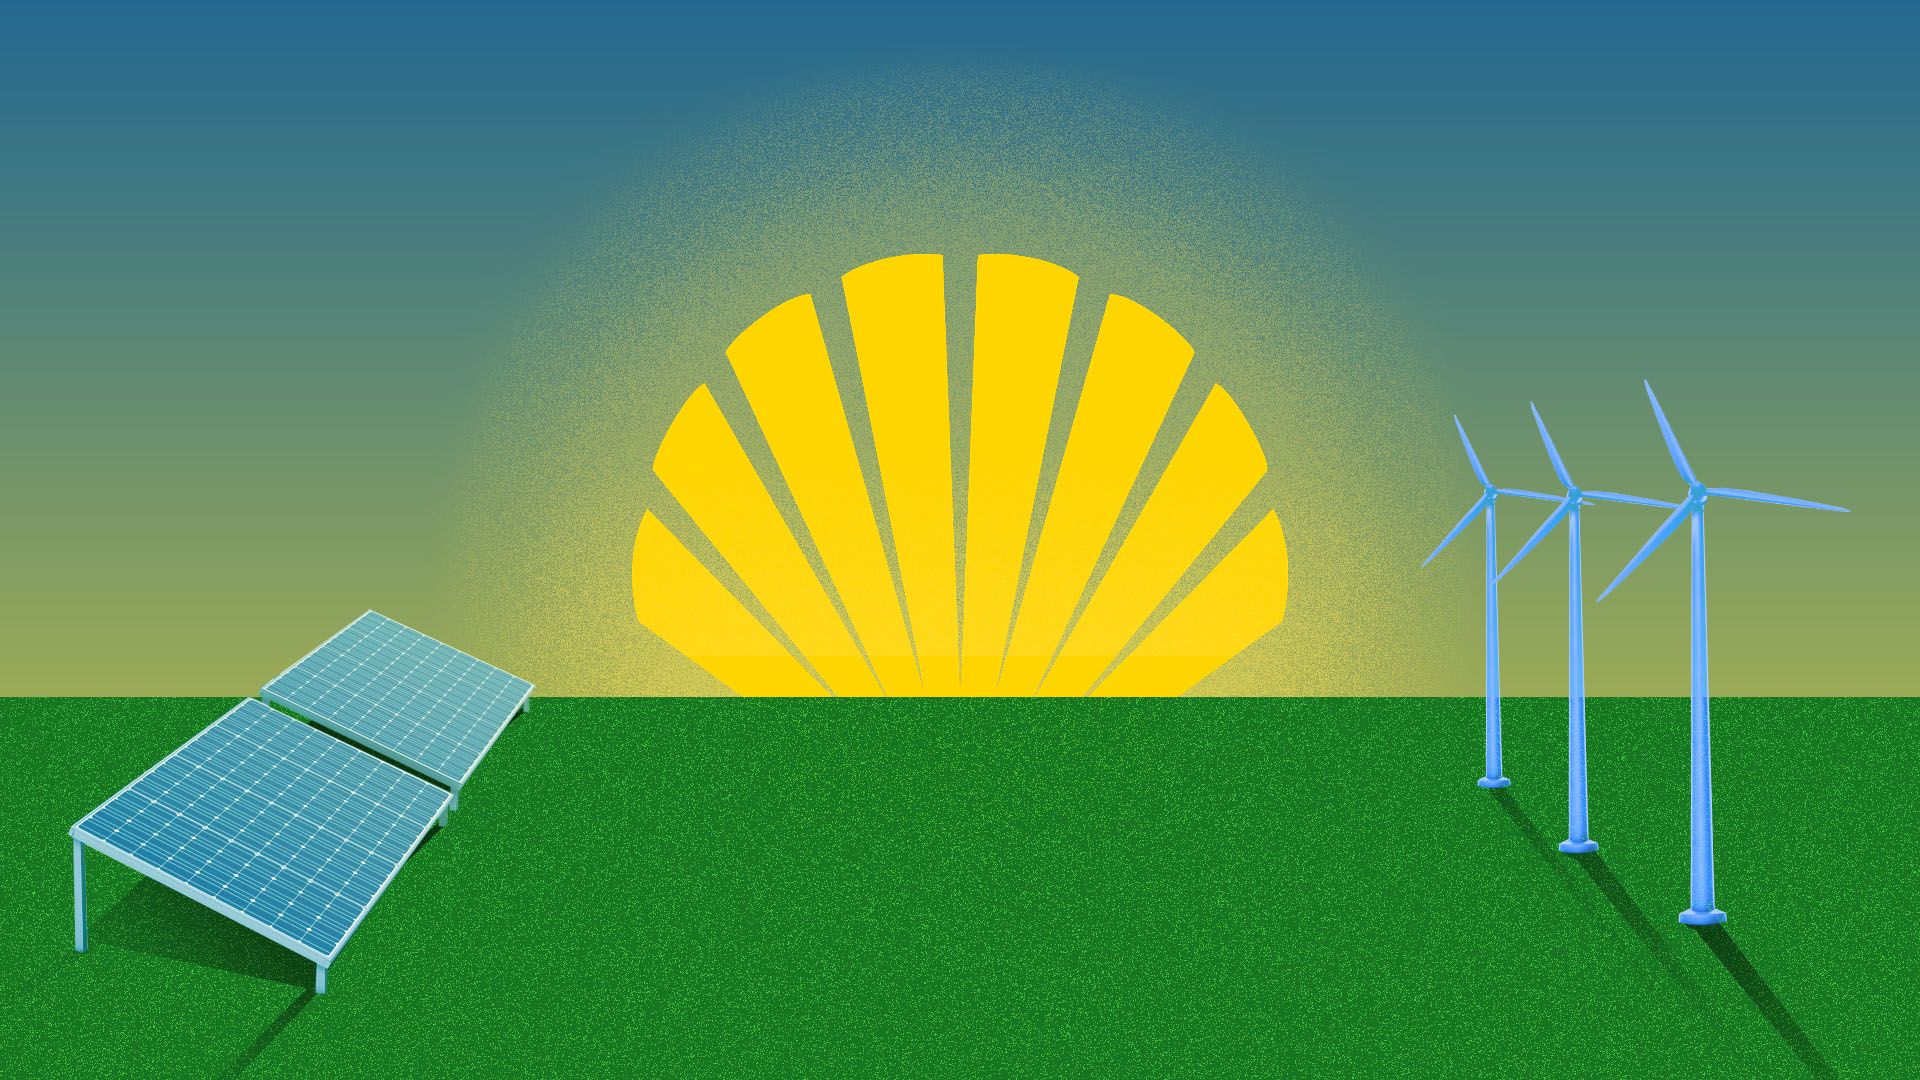 Illustration of the Shell logo as the sun rising over windmills and solar panels